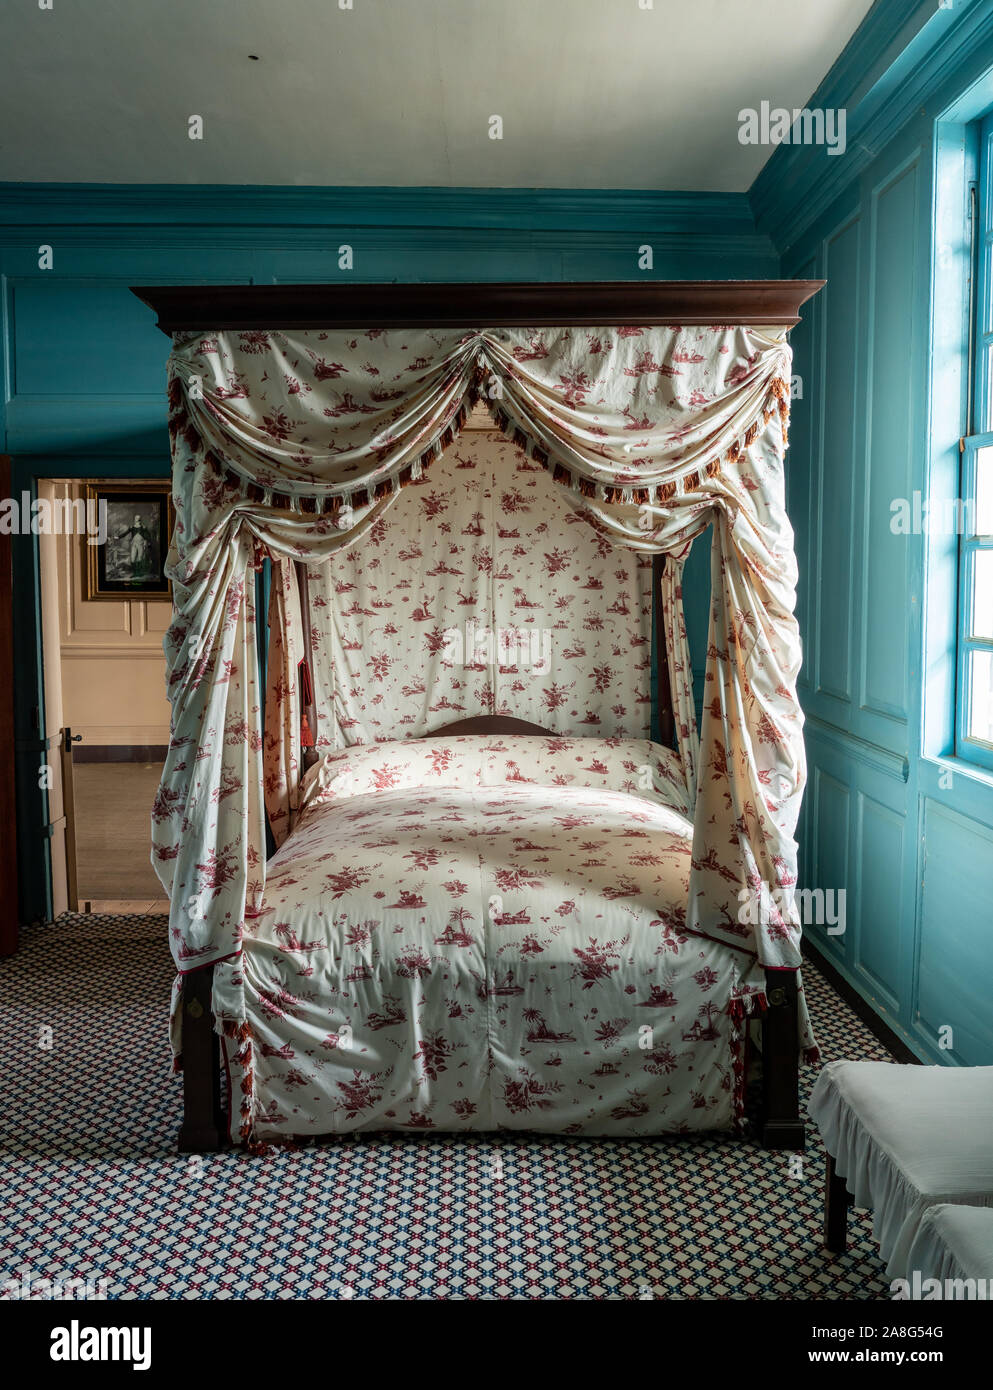 Mount Vernon, VA - 5 November 2019: Four poster bed and bedchamber in the interior of George Washington's home at Mt Vernon Stock Photo